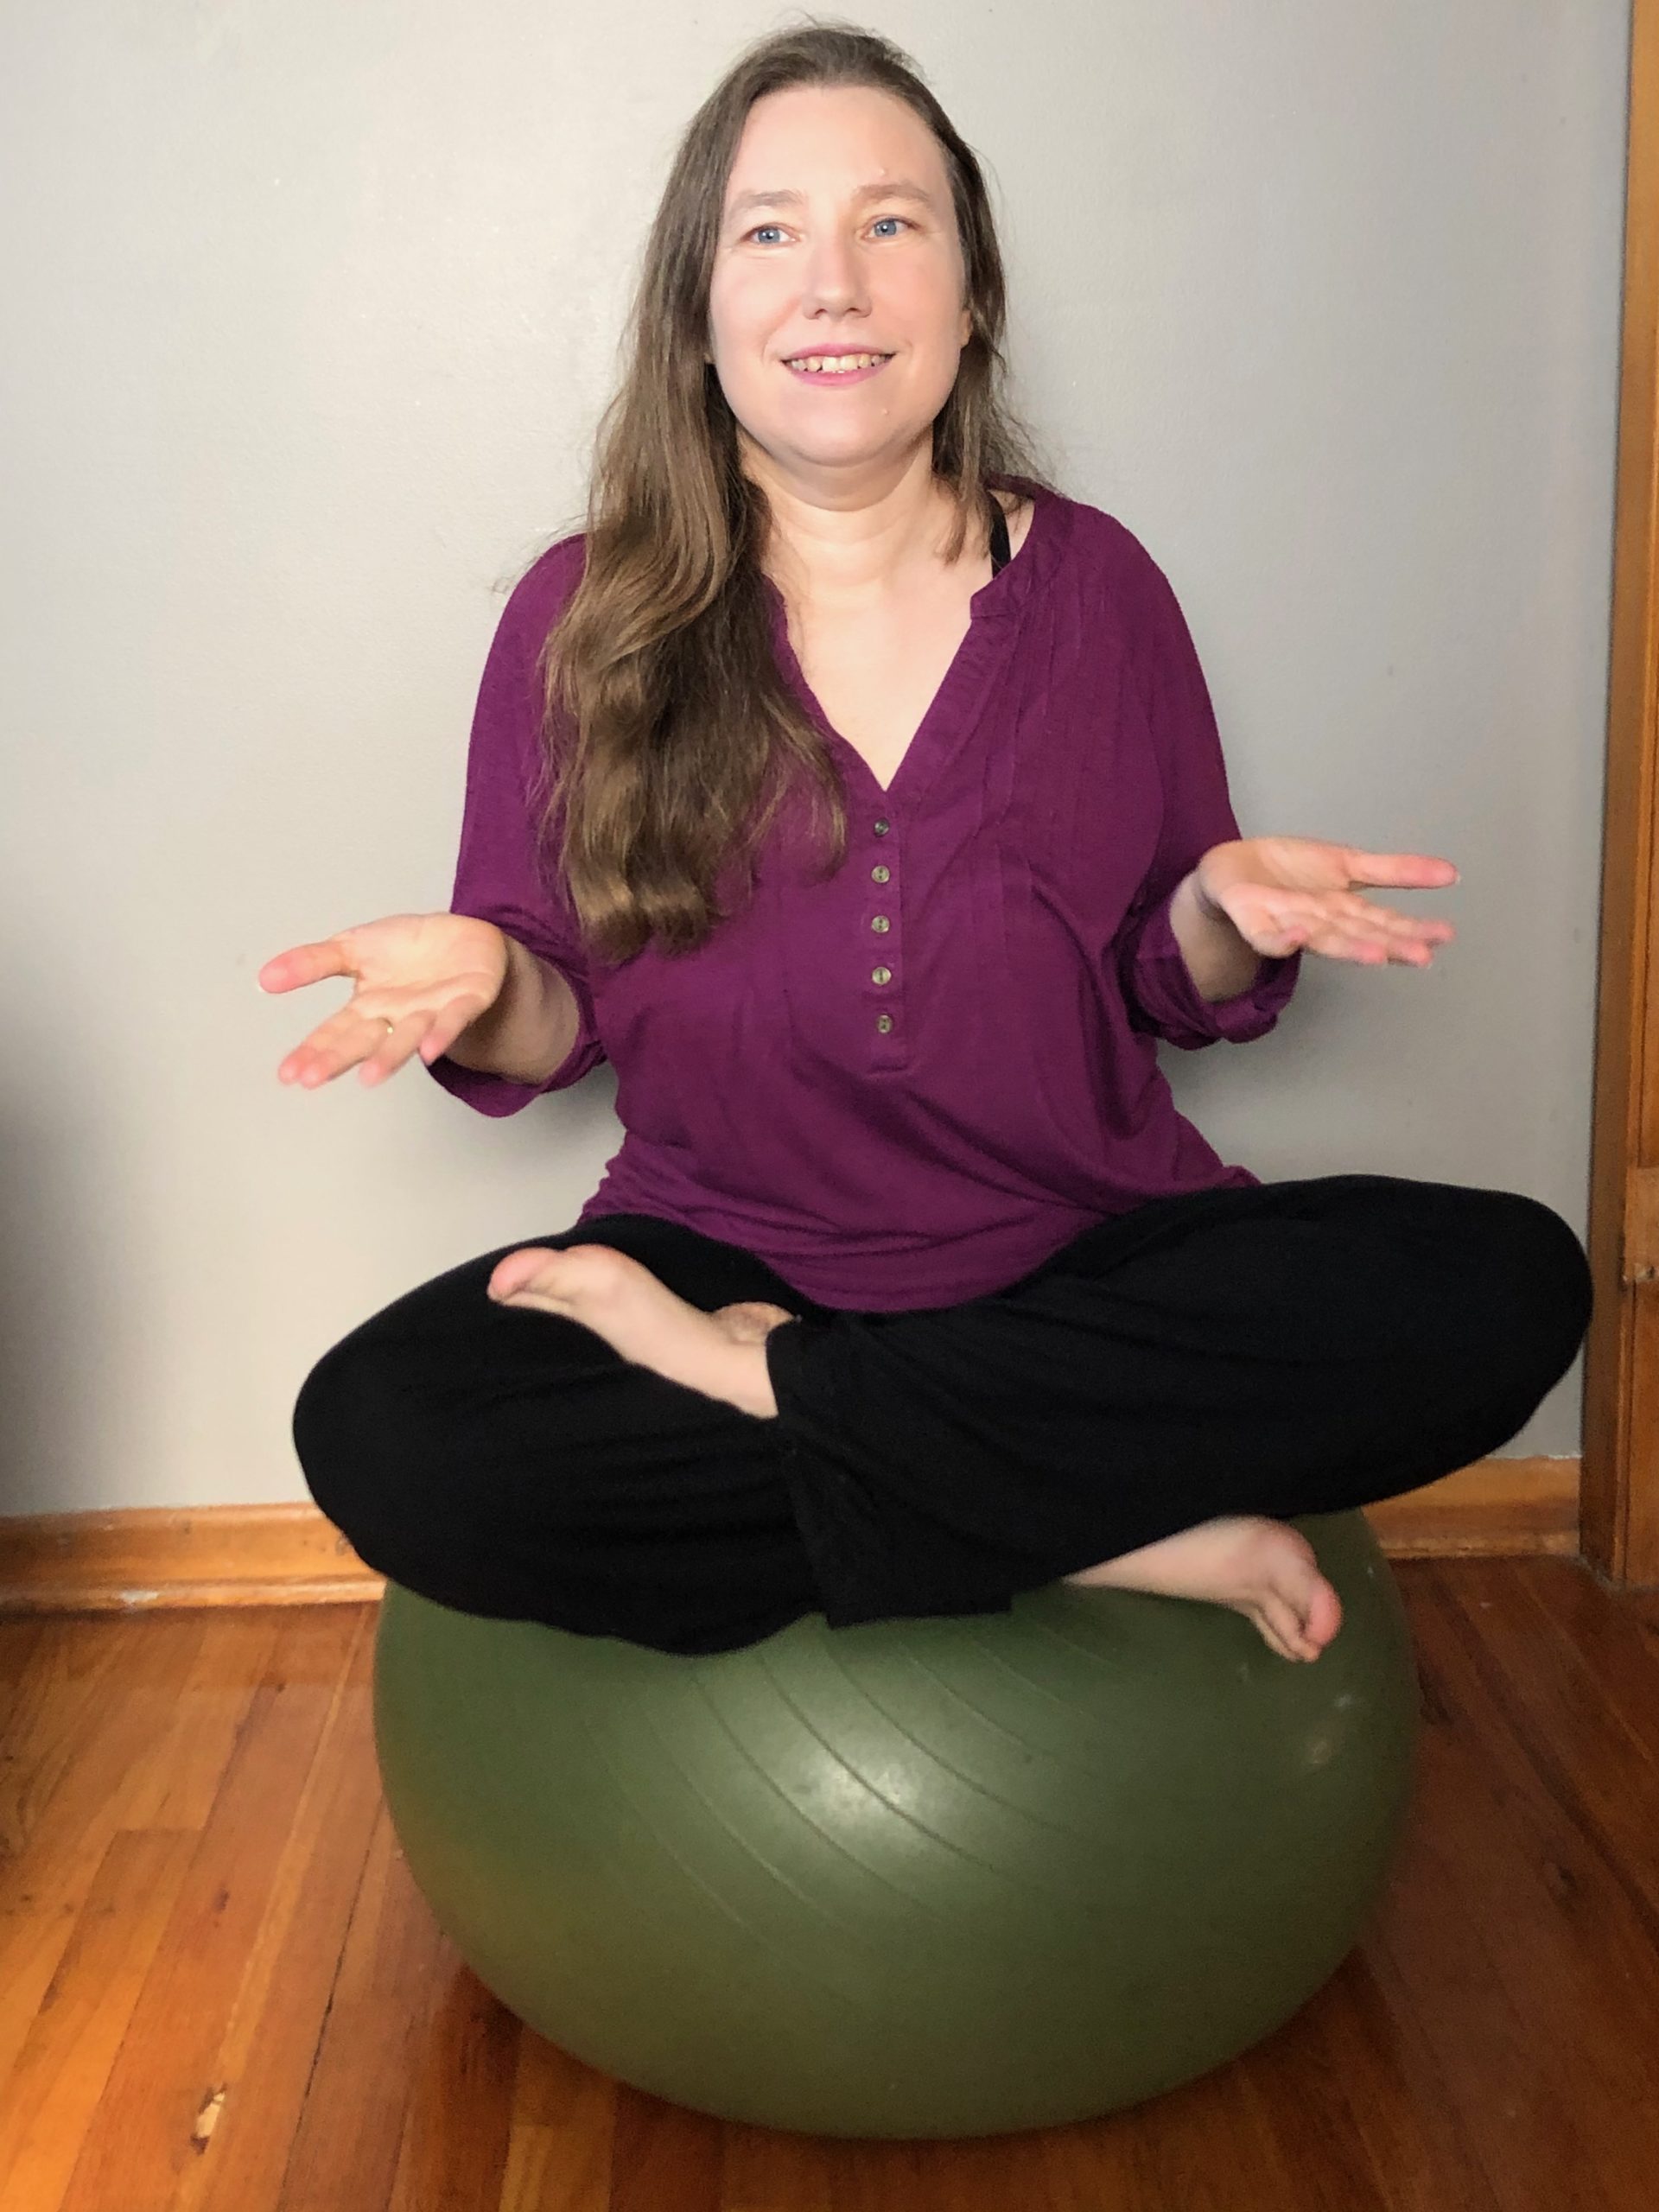 Women in a red shirt, shrugging while sitting cross-legged on a green yoga ball.